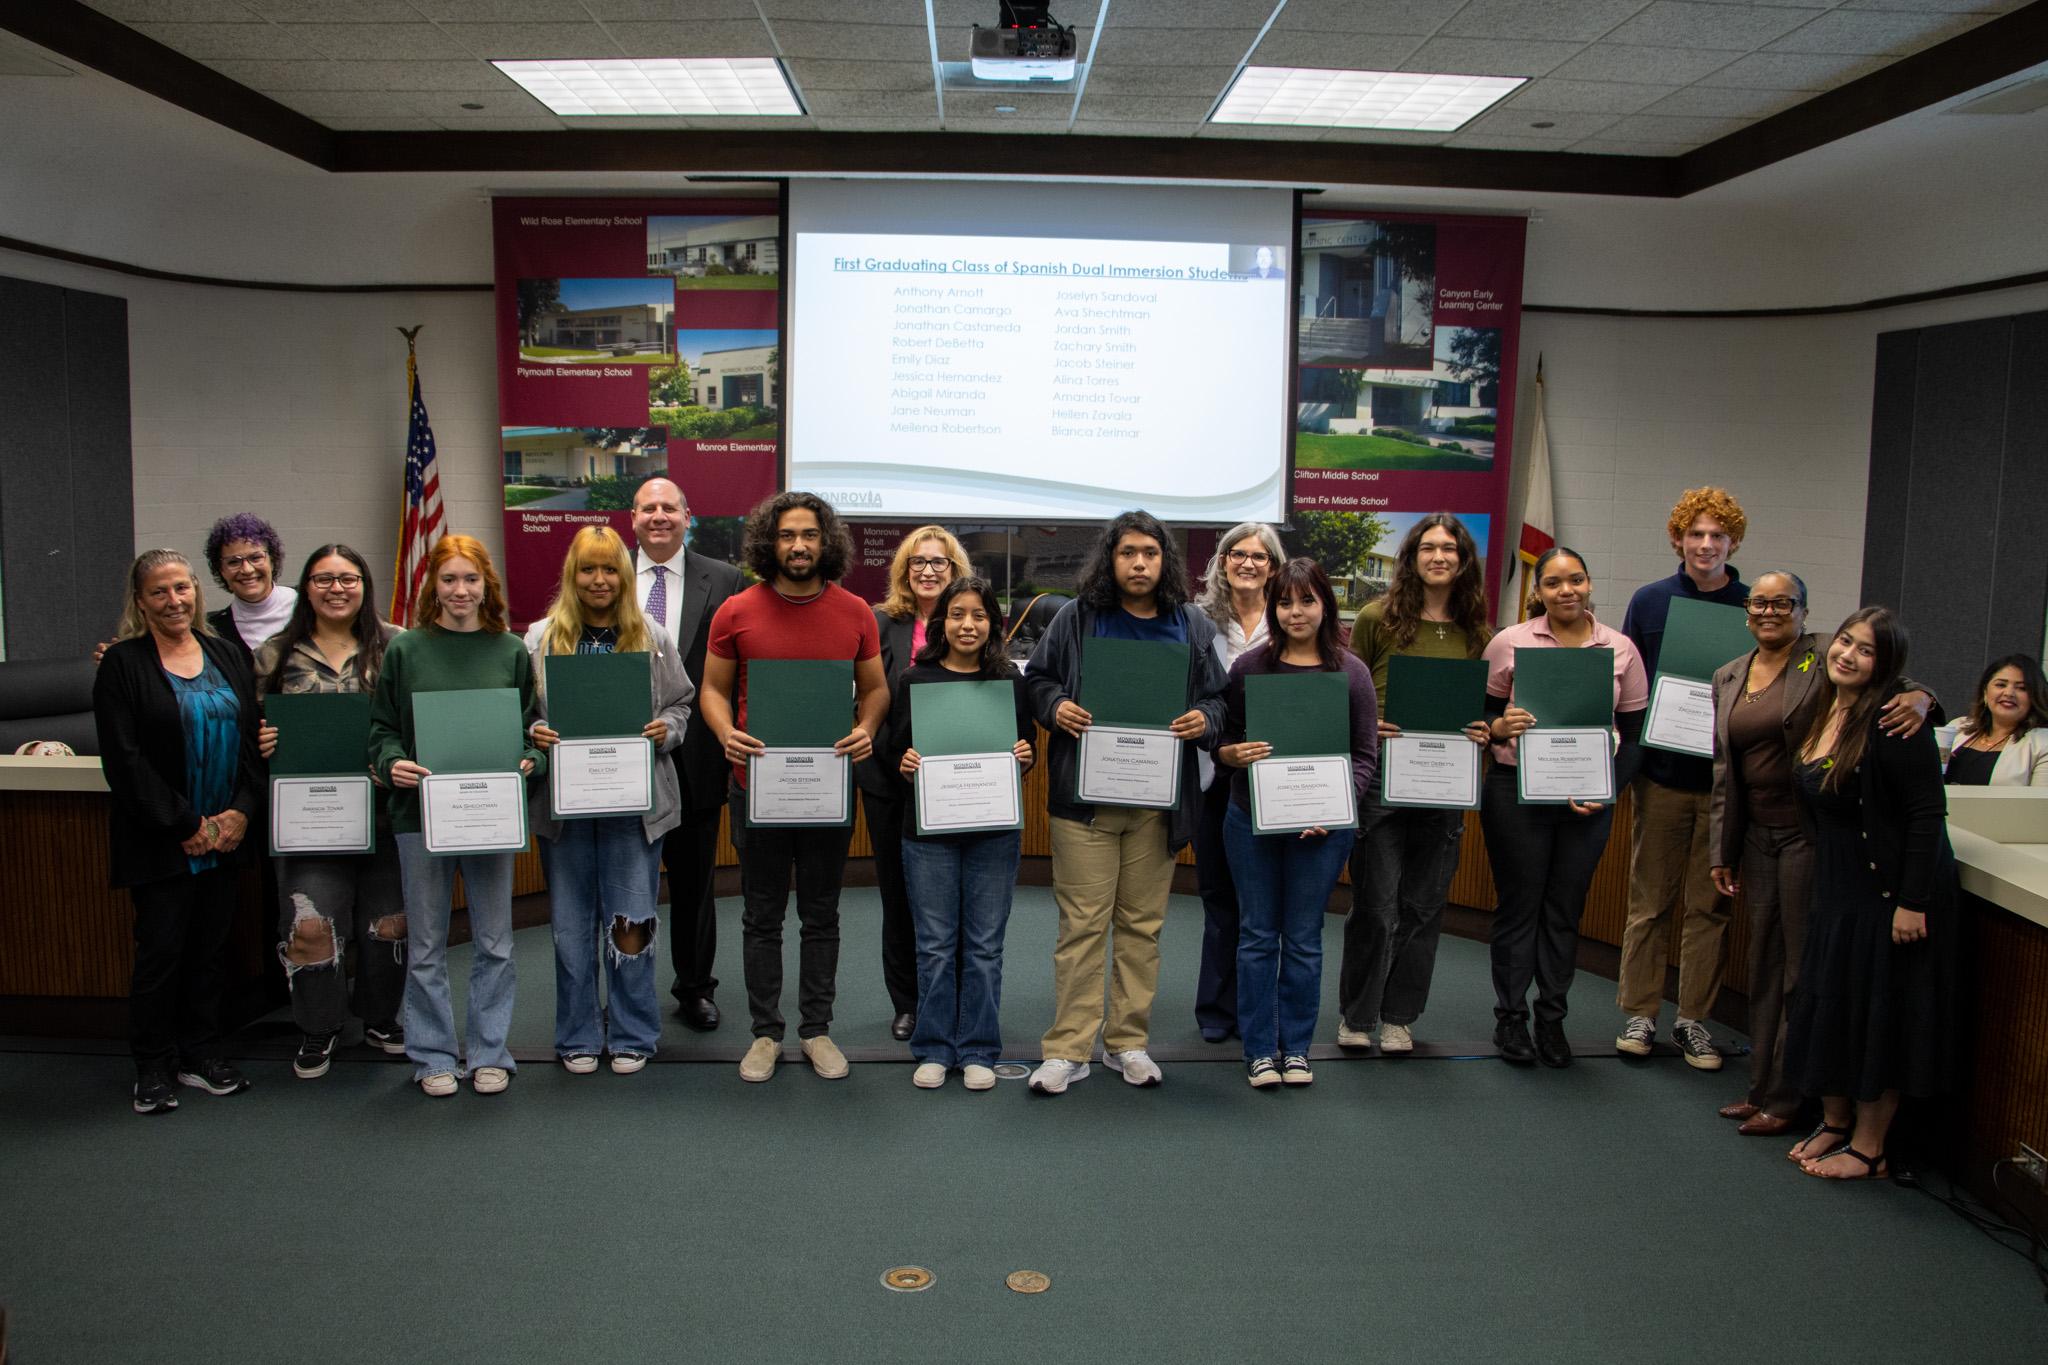 The Monrovia Unified School District Board of Education invited students from the first graduating Dual Immersion Spanish Cohort and the Monrovia High School Valedictorians to lead the Pledge of Allegiance.